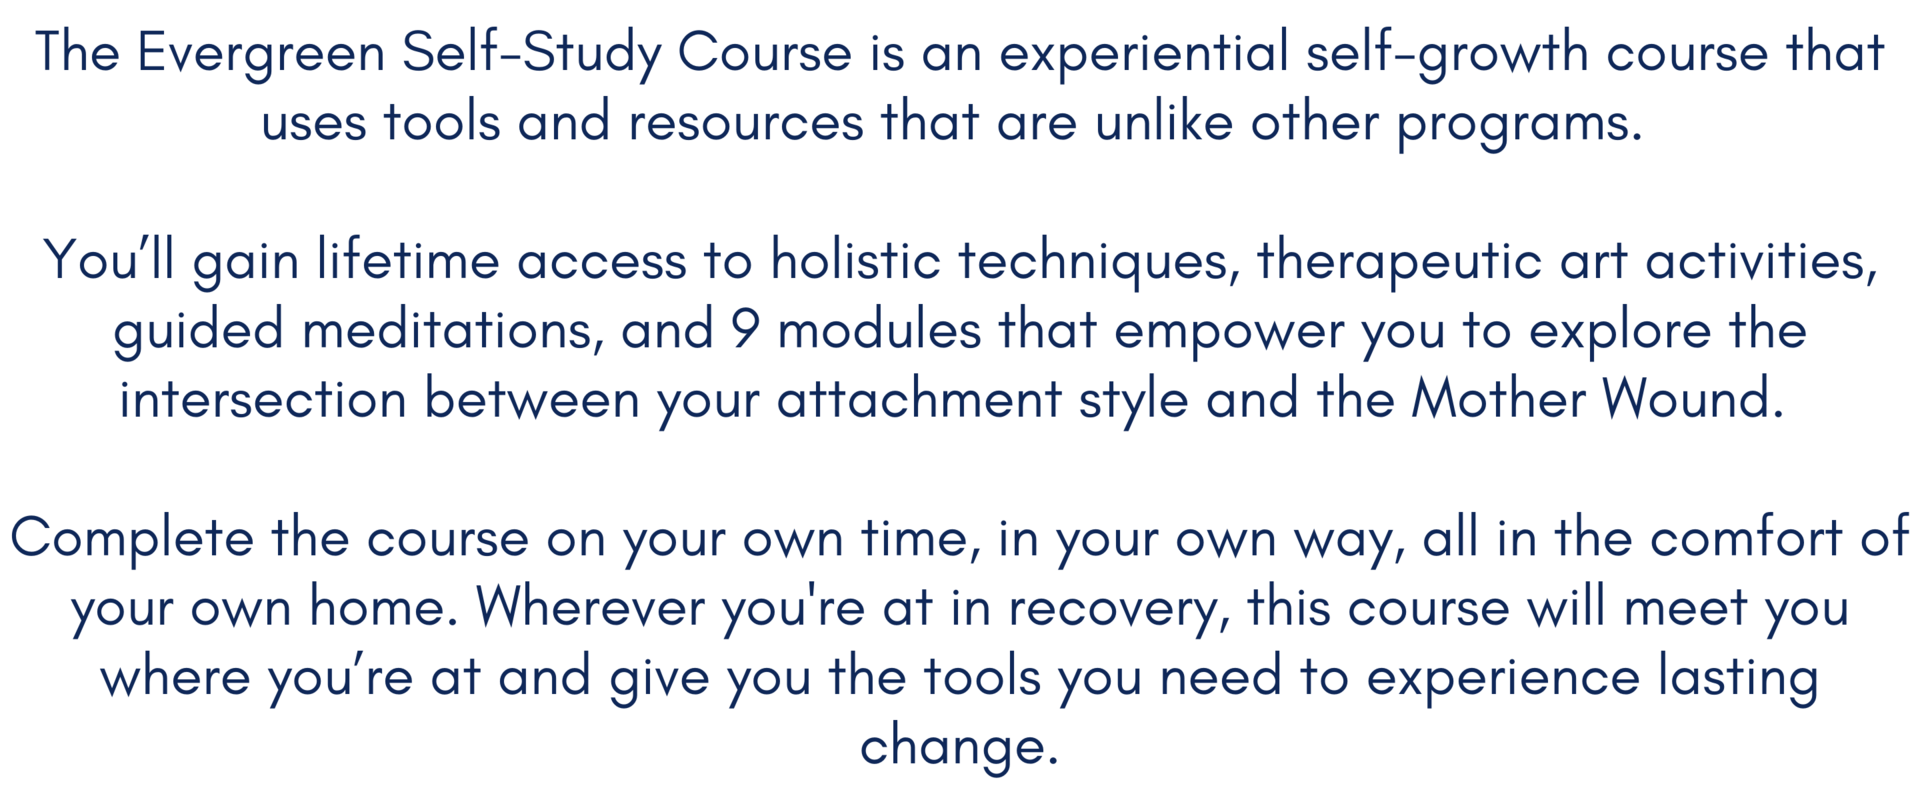 The Evergreen Self-Study Course is an experiential self-growth course that uses tools and resources that are unlike other programs. 